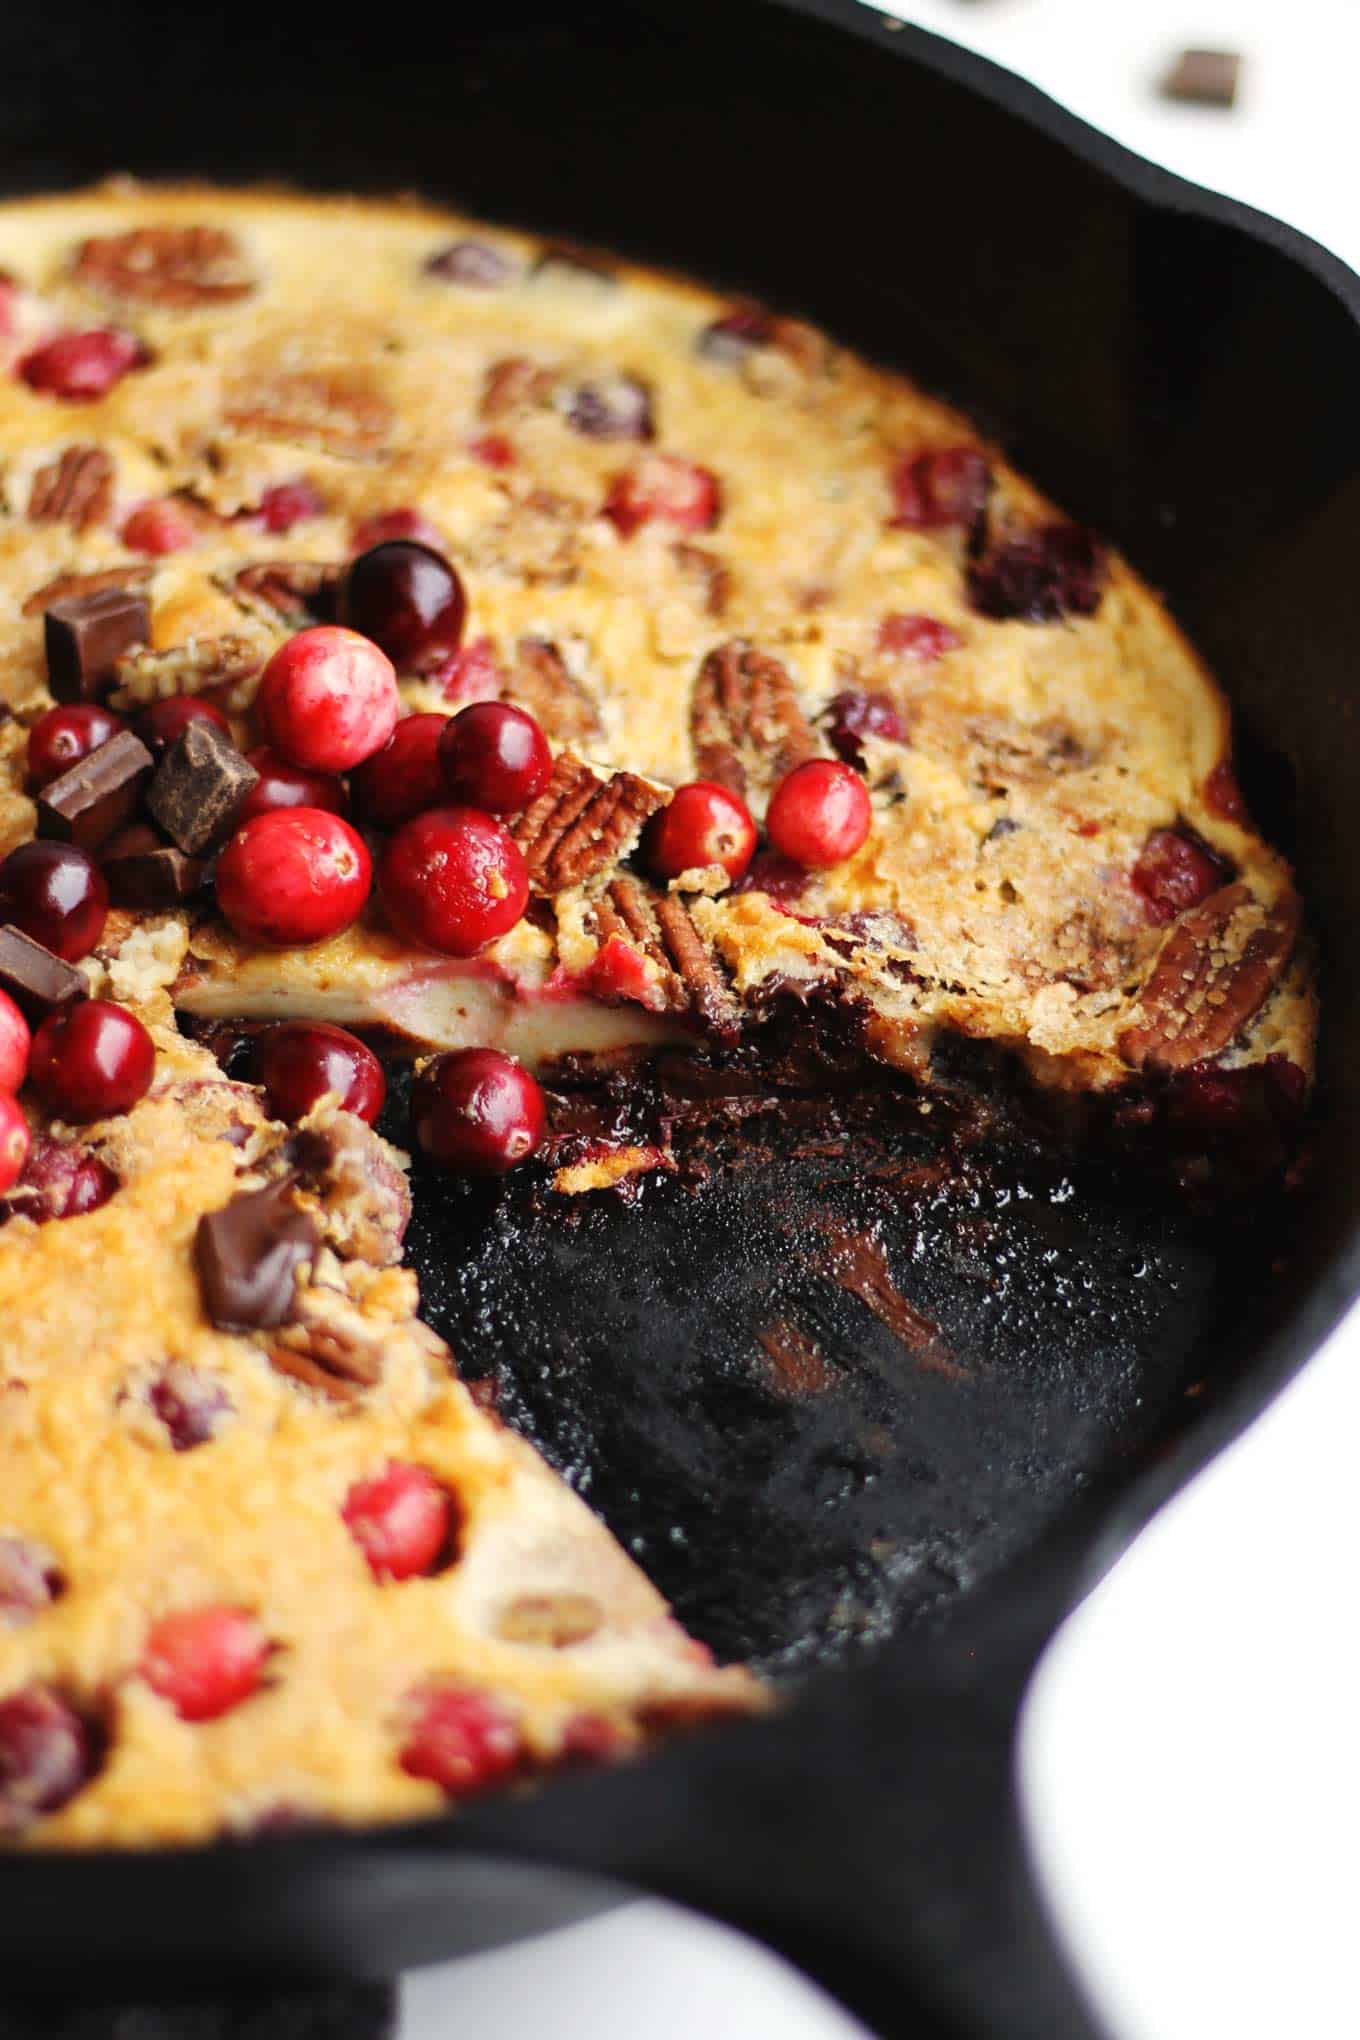 Cranberry clafoutis with dark chocolate and pecans! Easy blender recipe for the classic French custardy breakfast, with a holiday spin. Eat dessert for breakfast! - Rhubarbarians